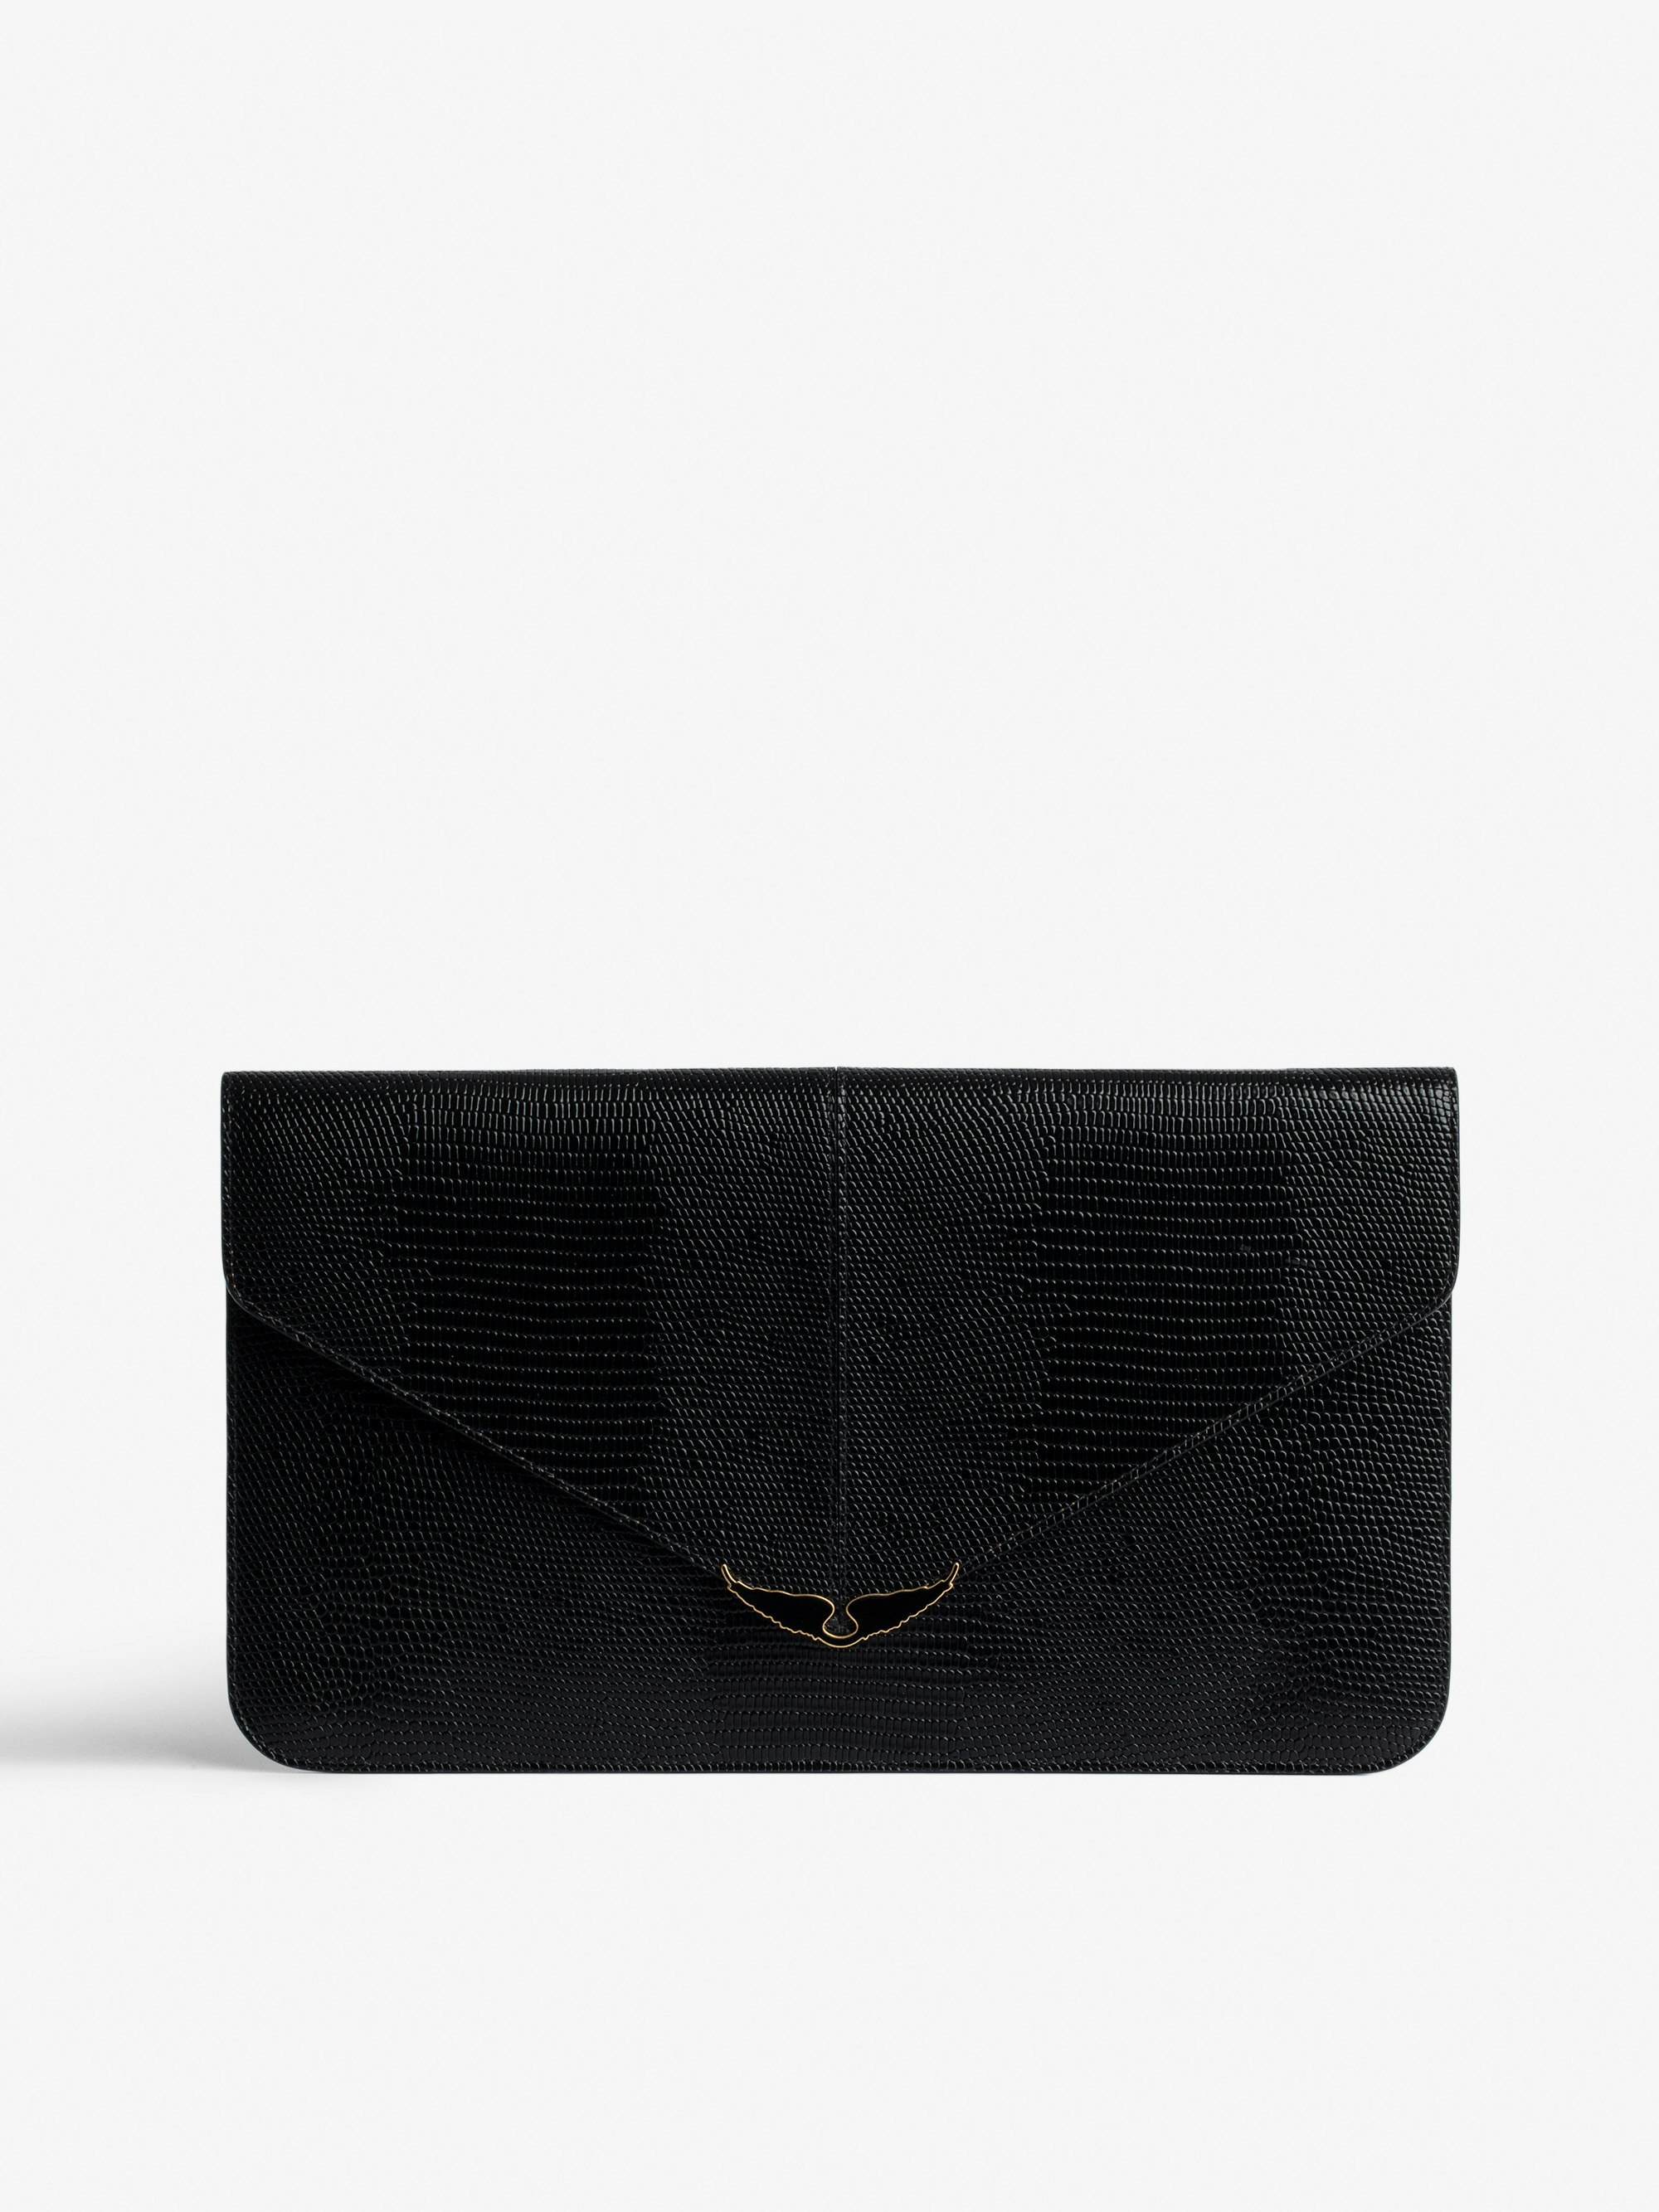 Borderline Pouch - Women’s envelope clutch in shiny black leather with embossed iguana, khaki suede interior, and black lacquered wings on the clasp.